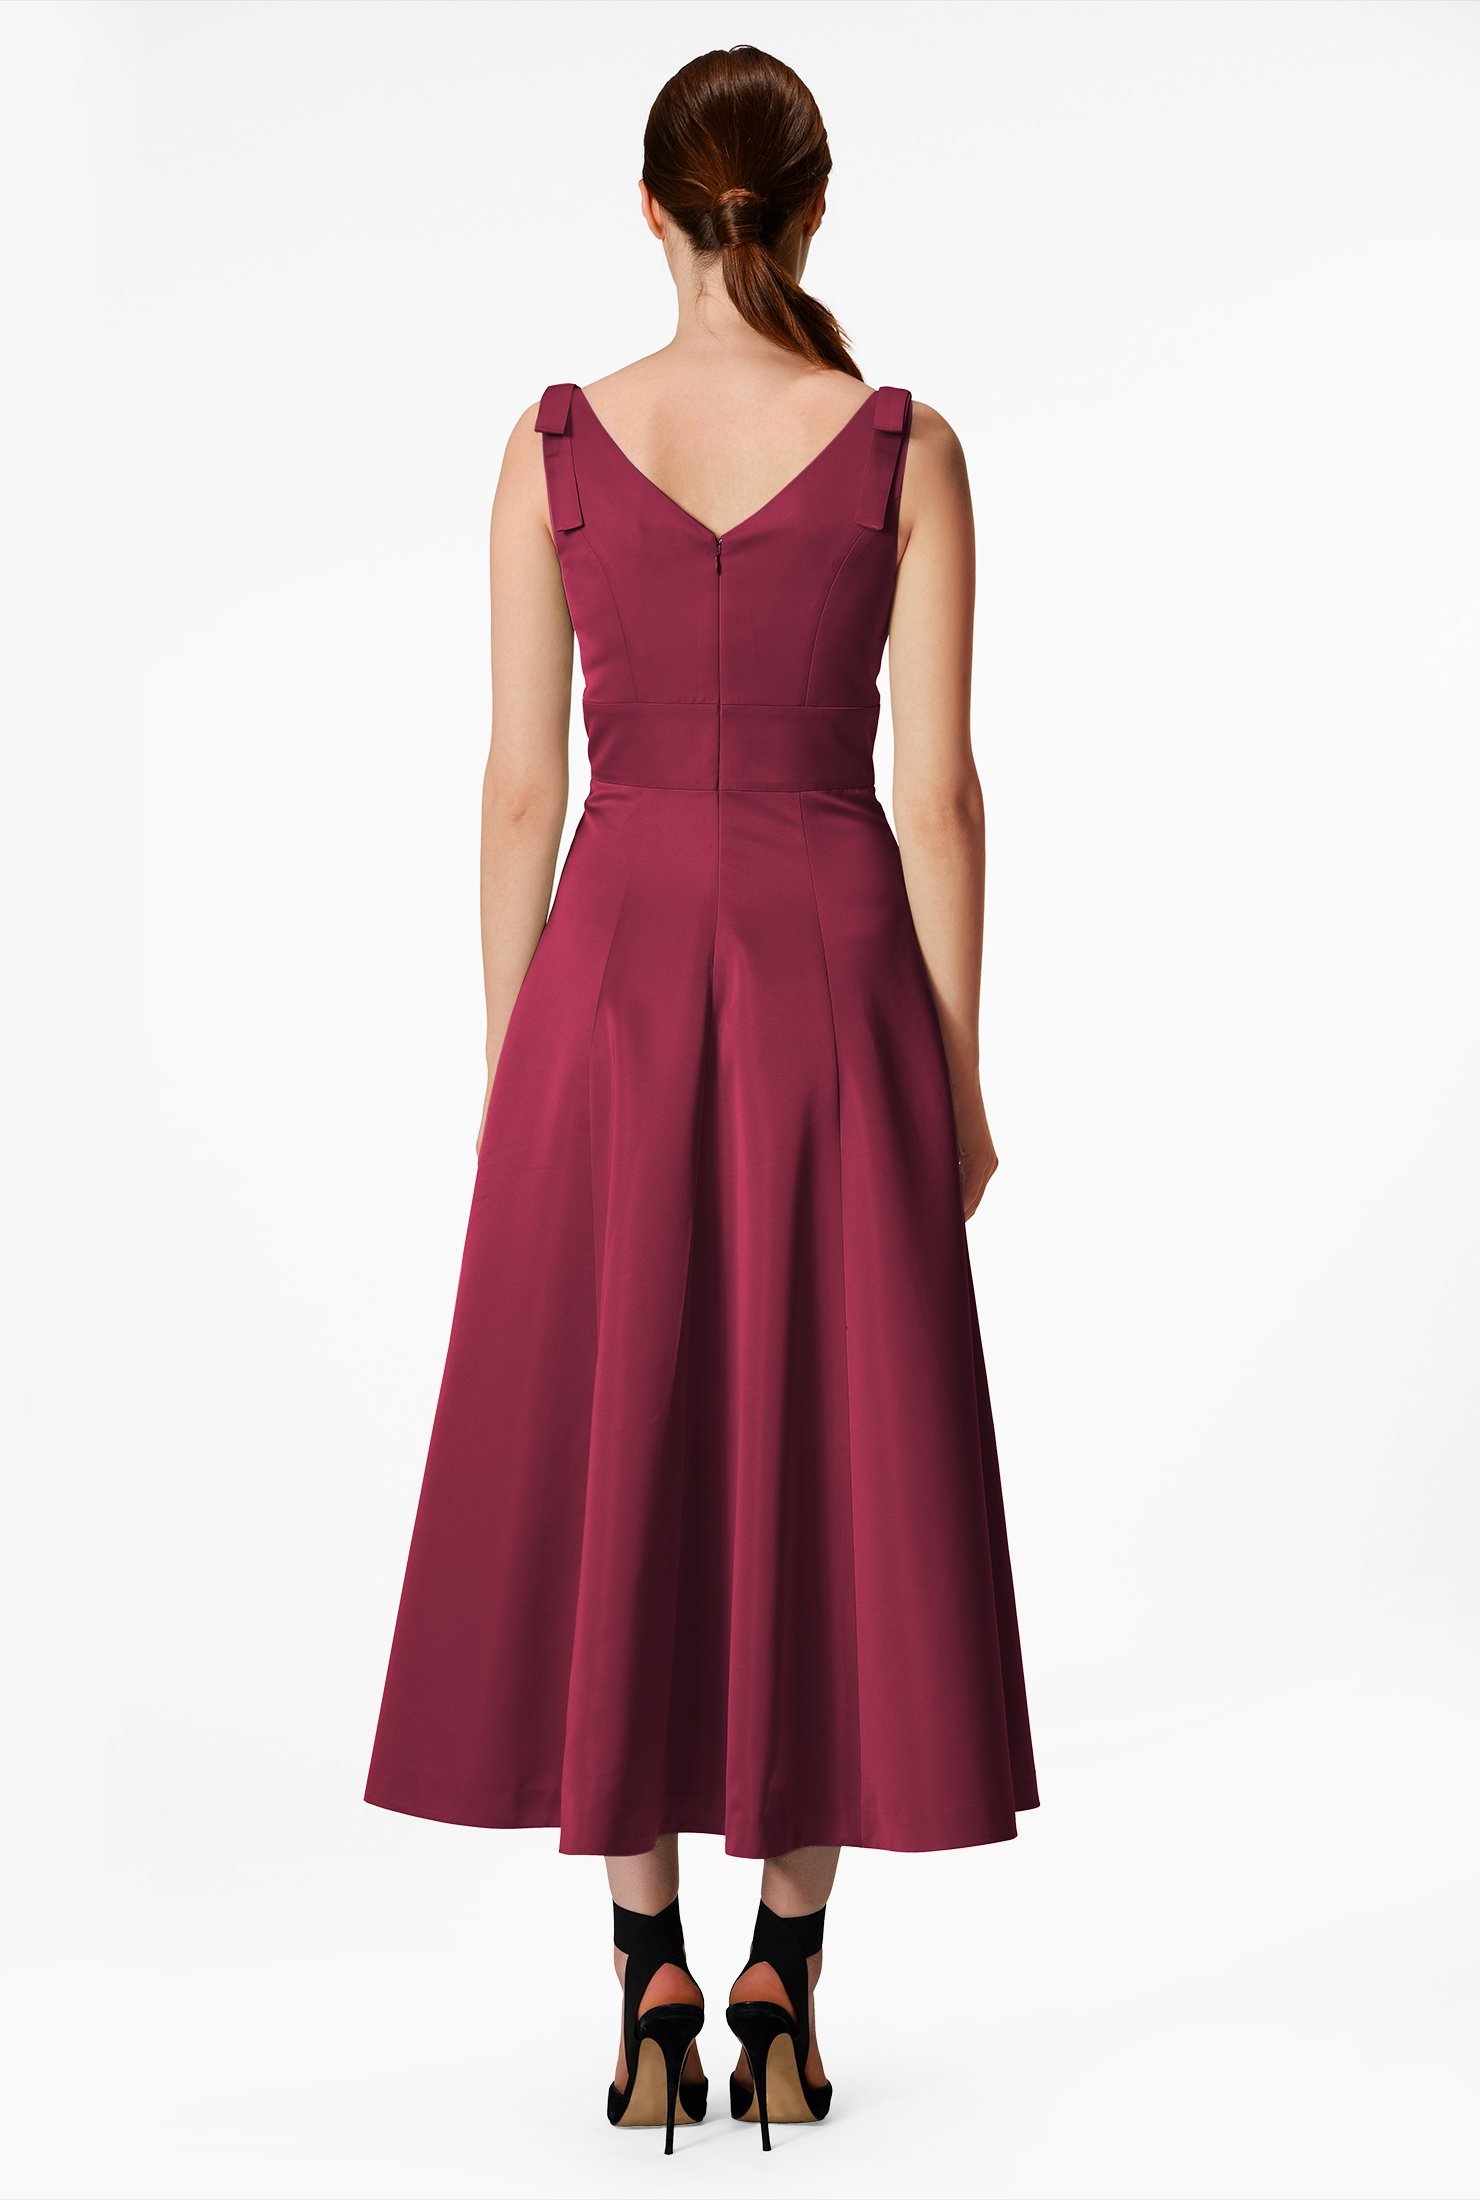 The graceful drape of bows beautifully contrasts against the princess seamed, curve-flattering shape of our elegant dress in taffeta with a satin finish.